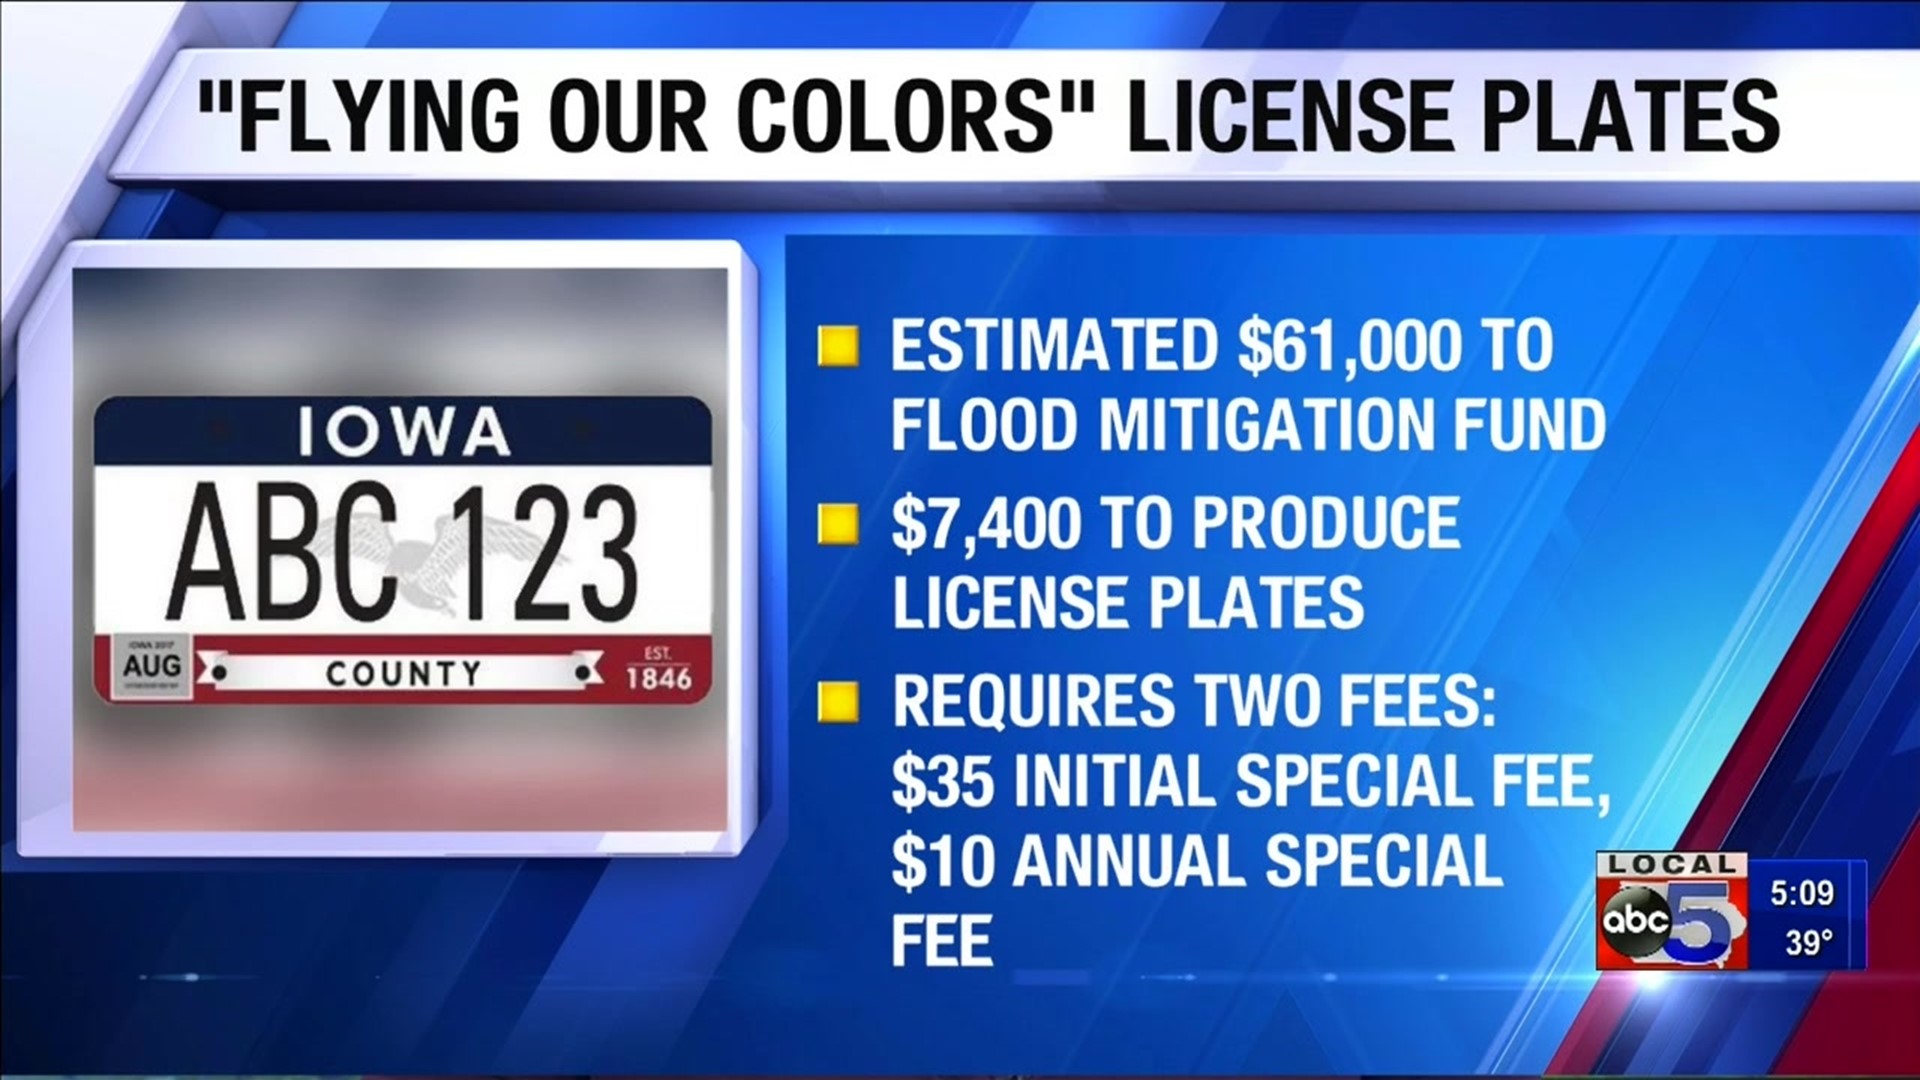 More info on costs, fund allocations for new Iowa licence plate